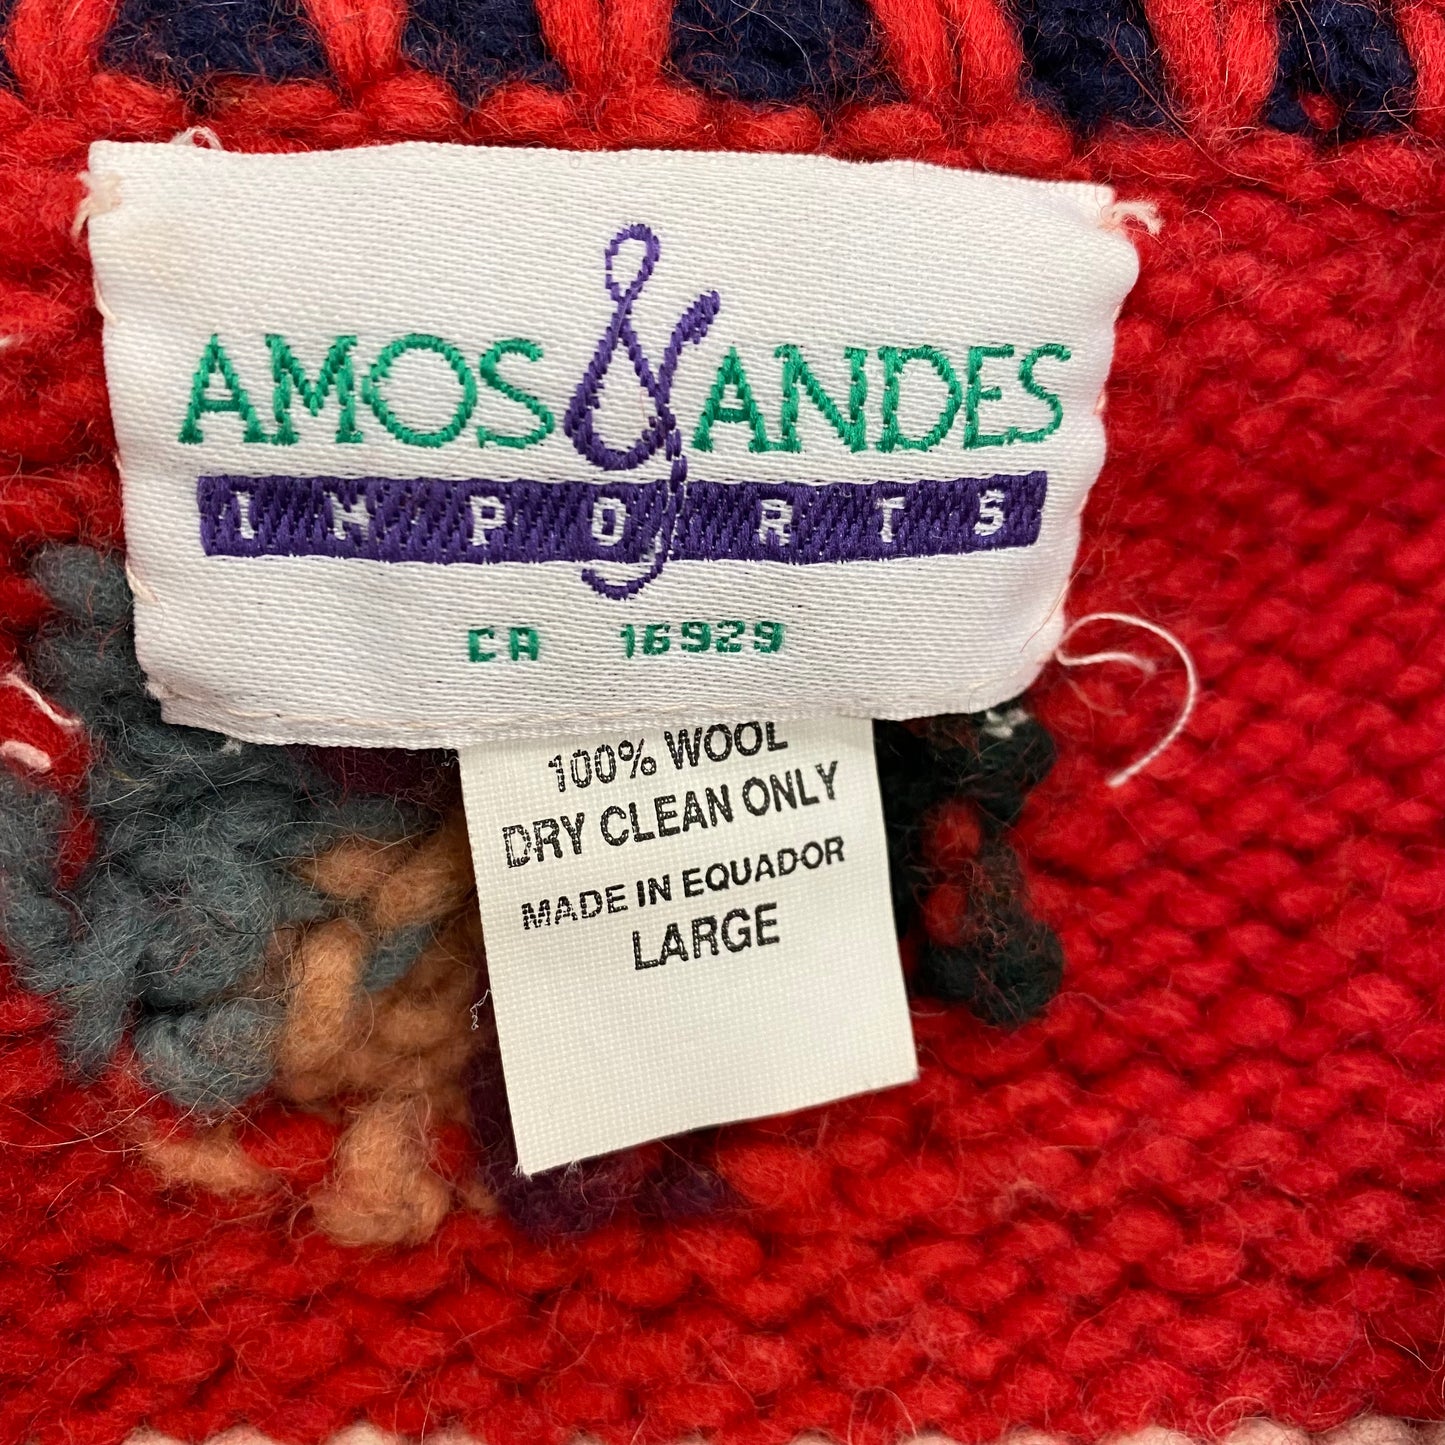 Amos & Andes Imports Hand-knit Wool Cardigan Sweater - Size Large